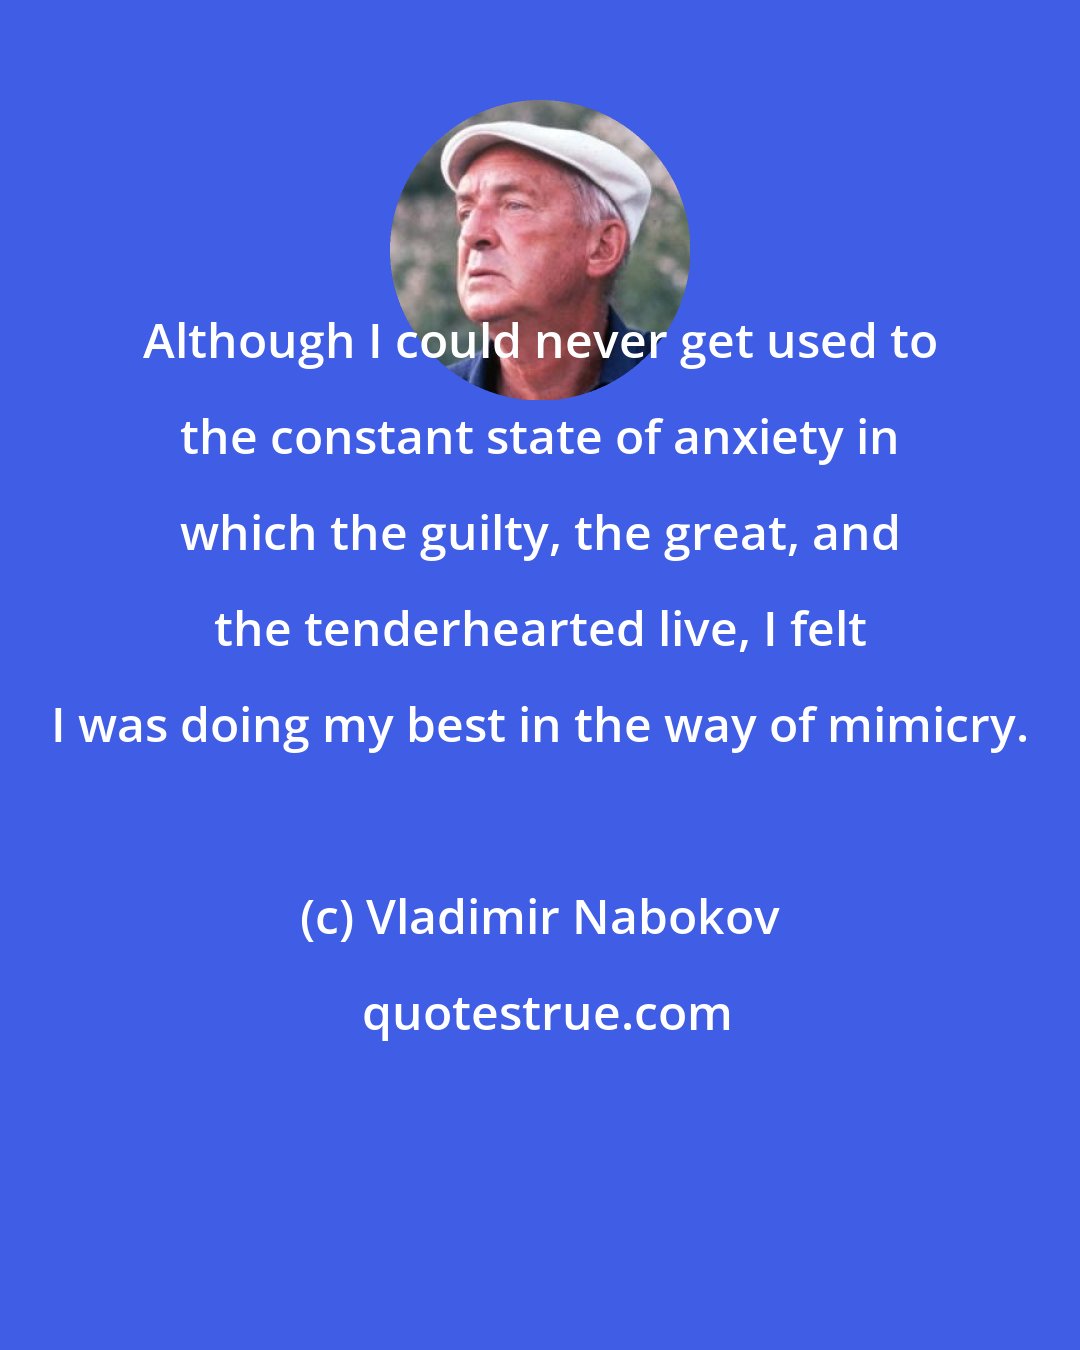 Vladimir Nabokov: Although I could never get used to the constant state of anxiety in which the guilty, the great, and the tenderhearted live, I felt I was doing my best in the way of mimicry.